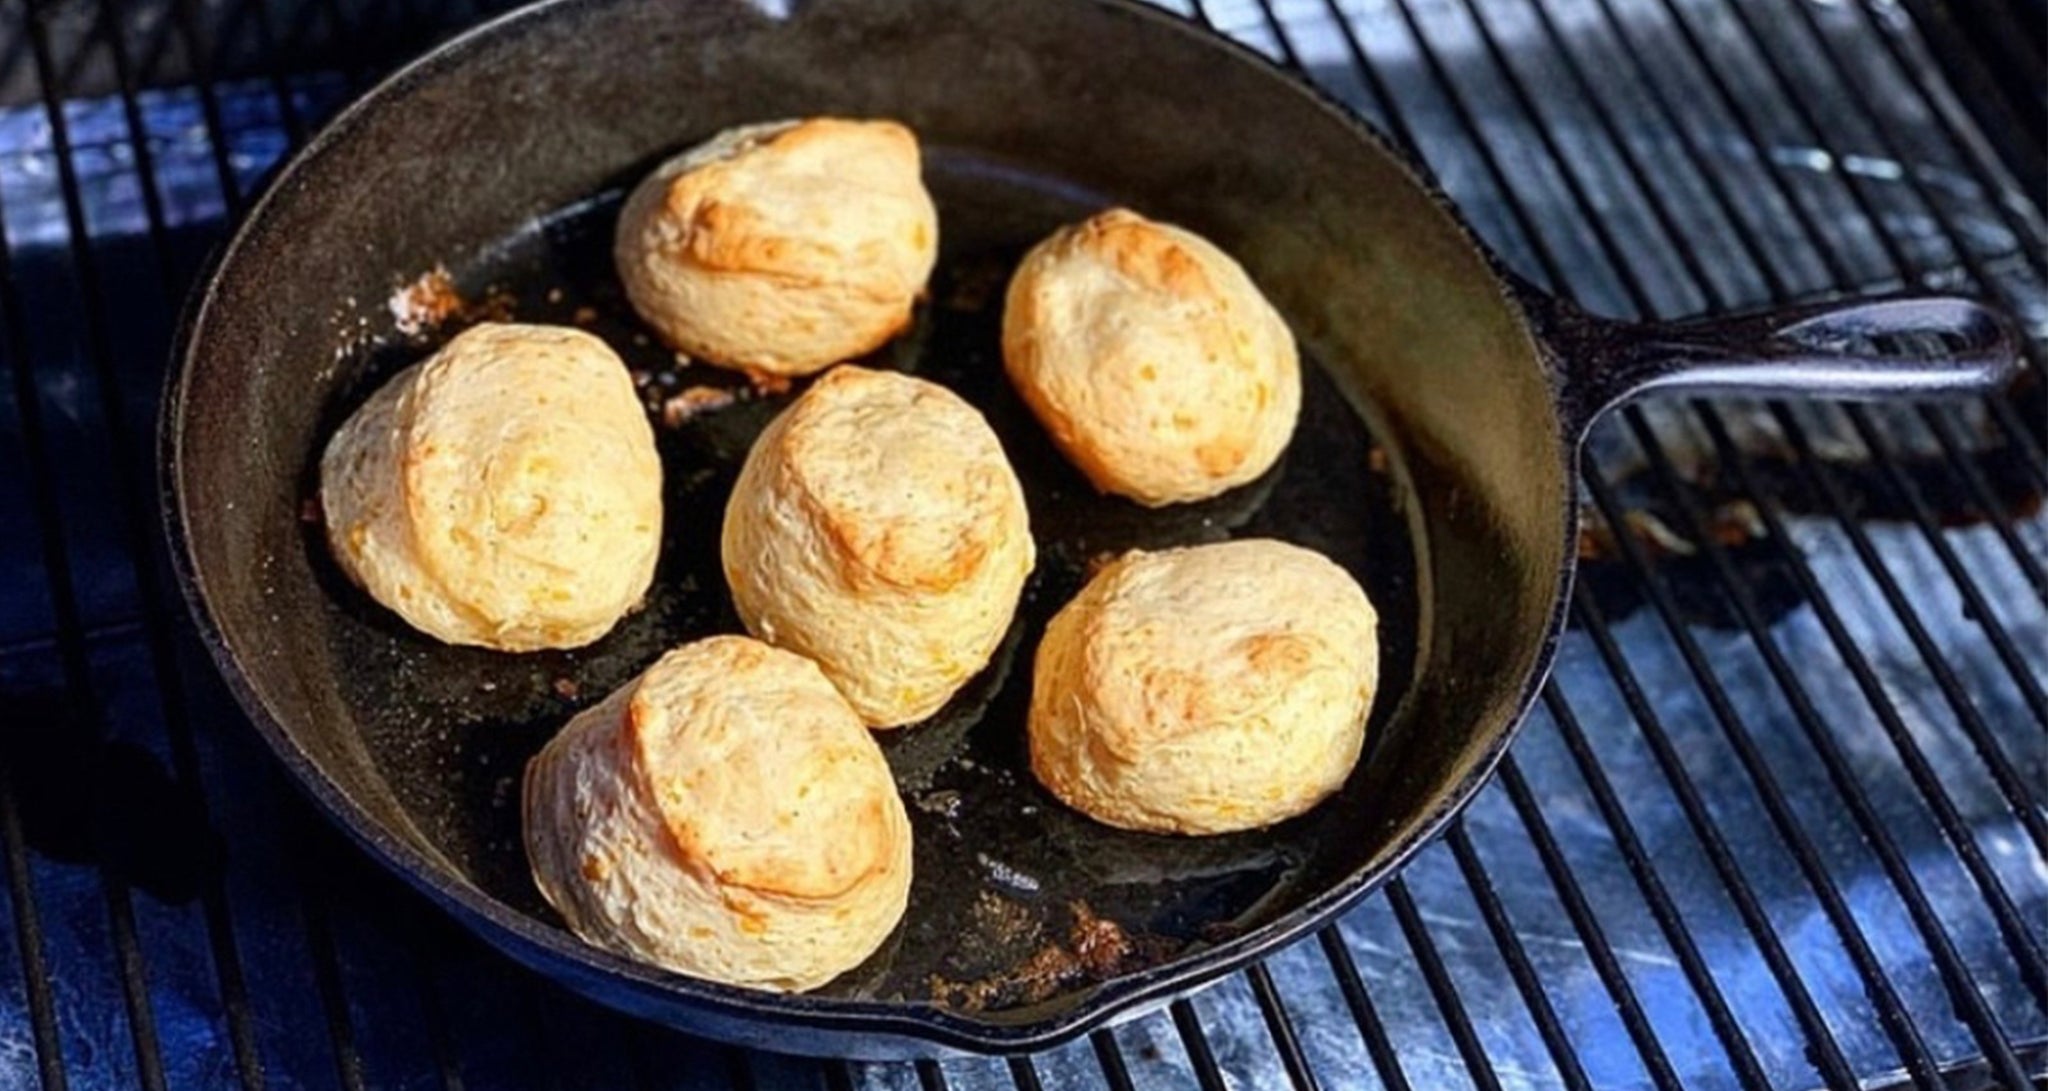 How to Grill Biscuits